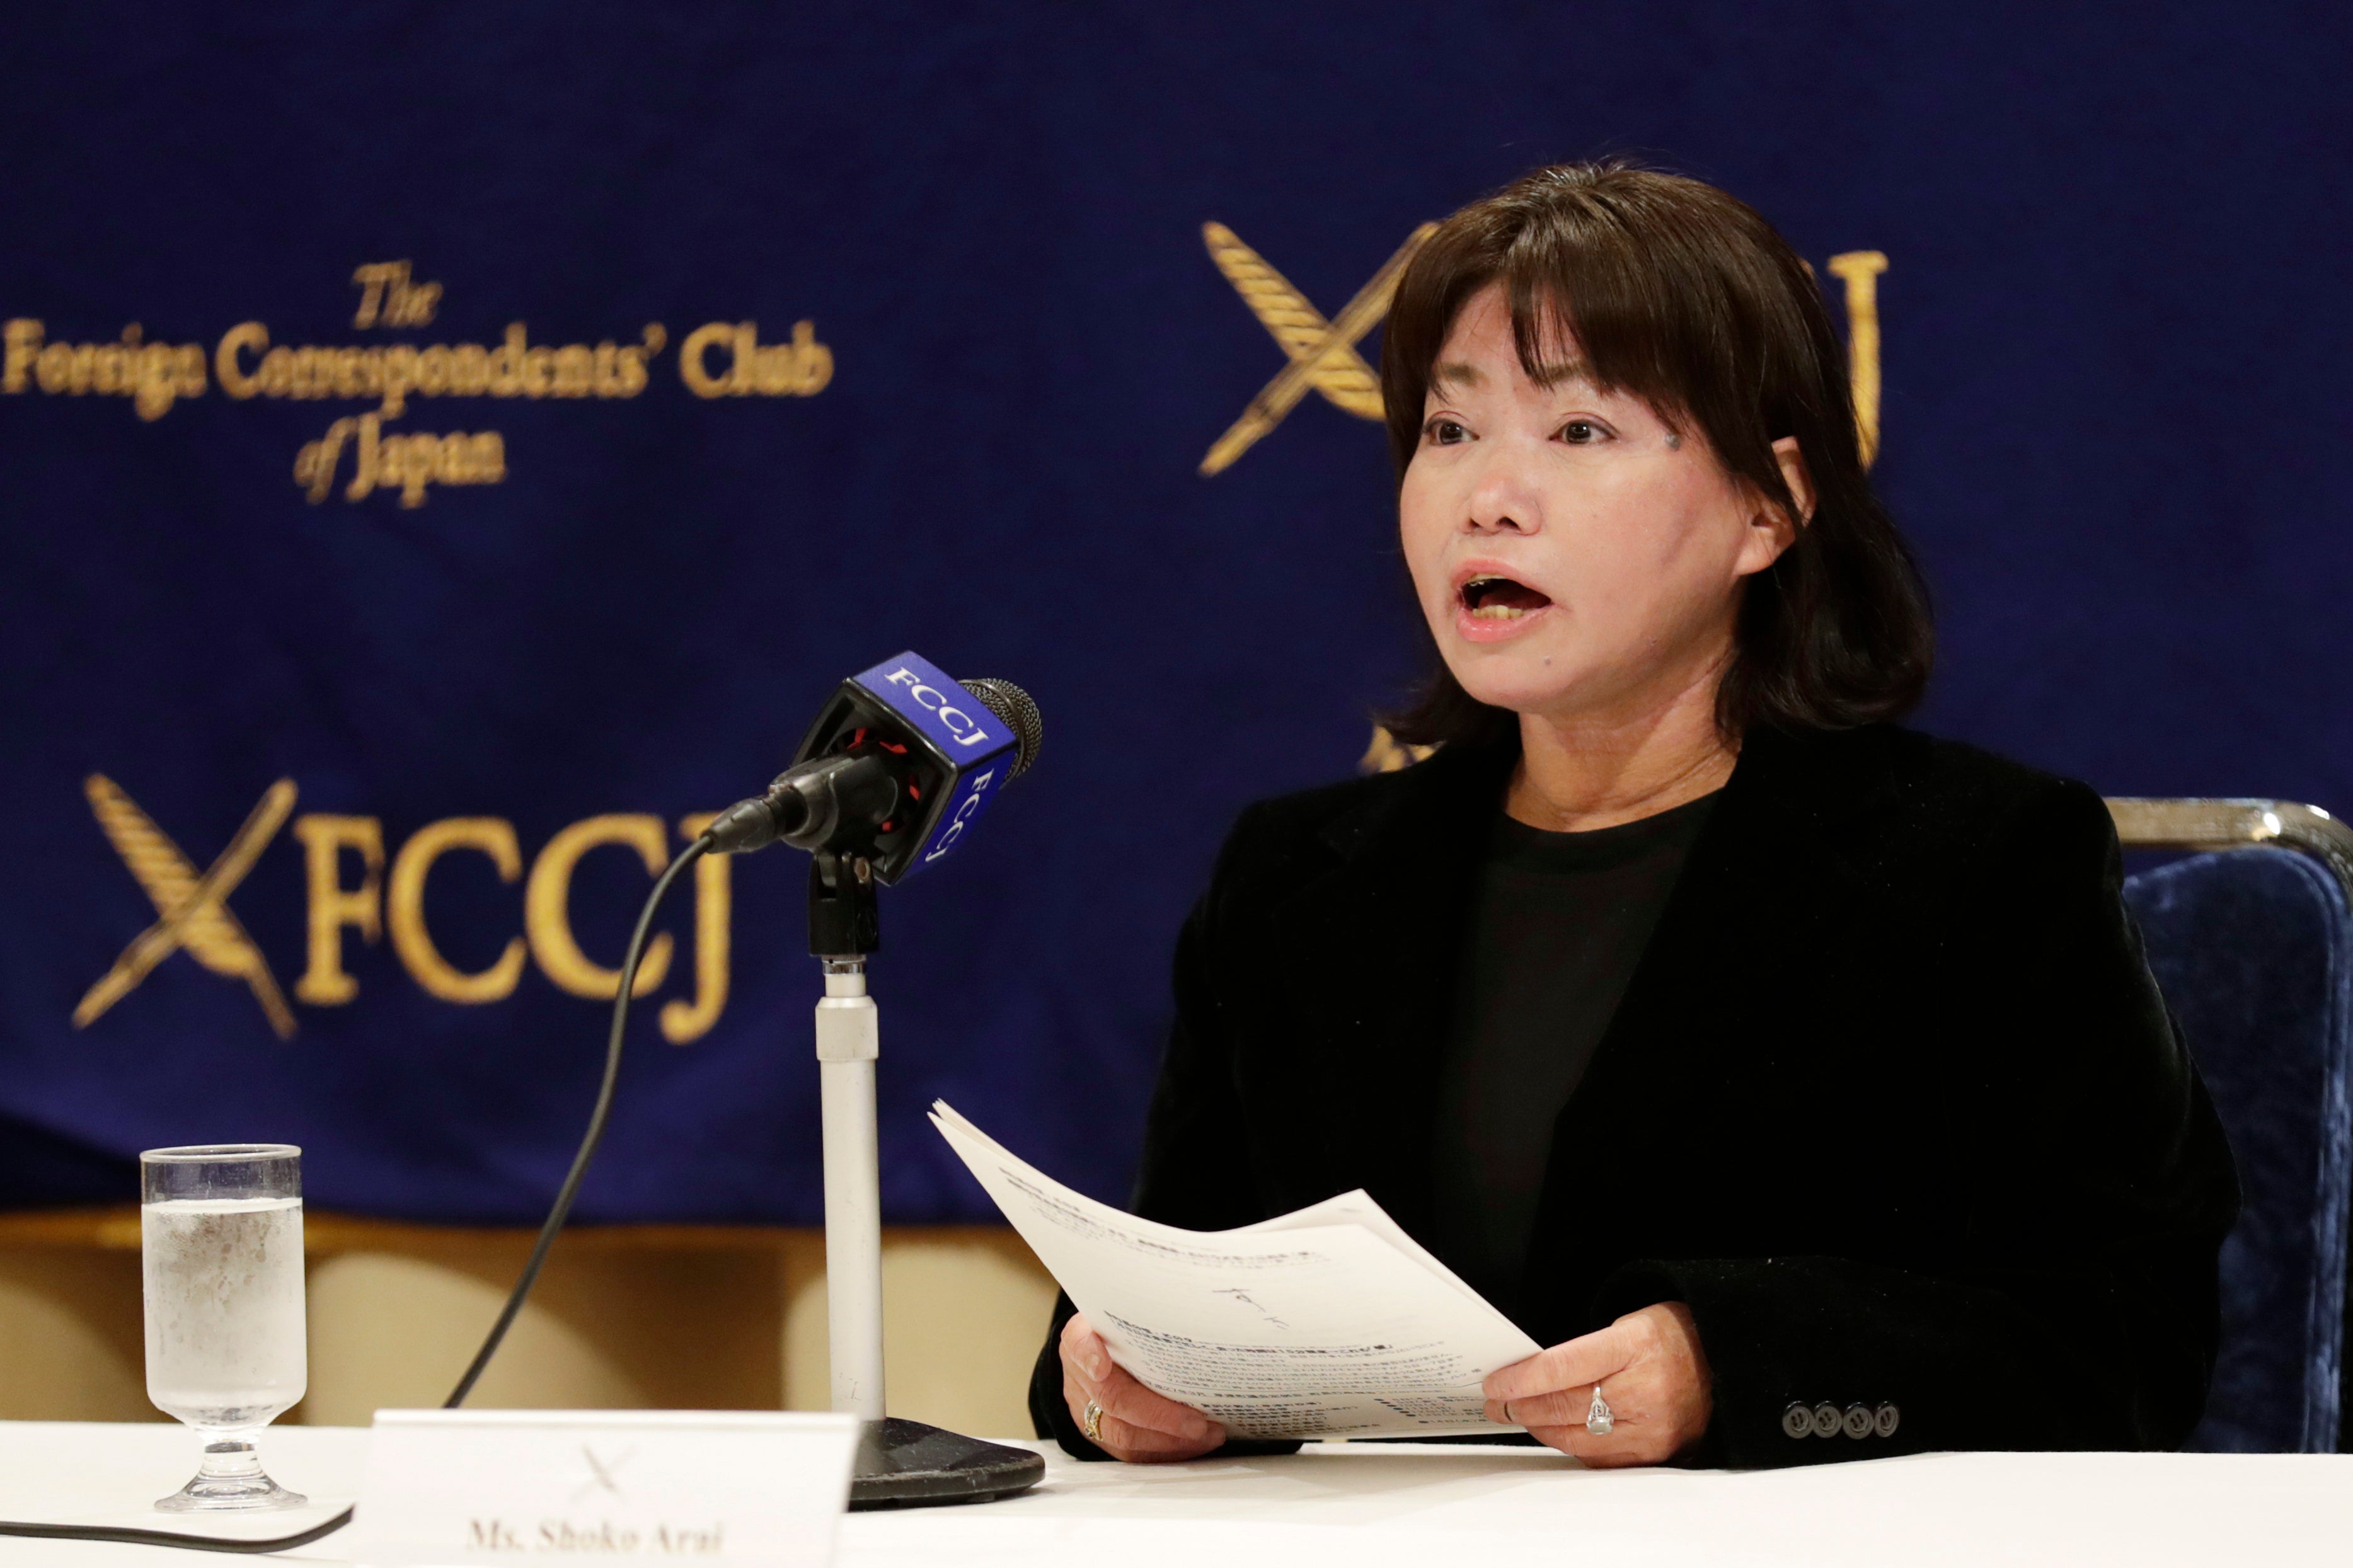 Japan councilwomen says ouster shows gender bias in politics Mayor politics hot springs problems women The Independent